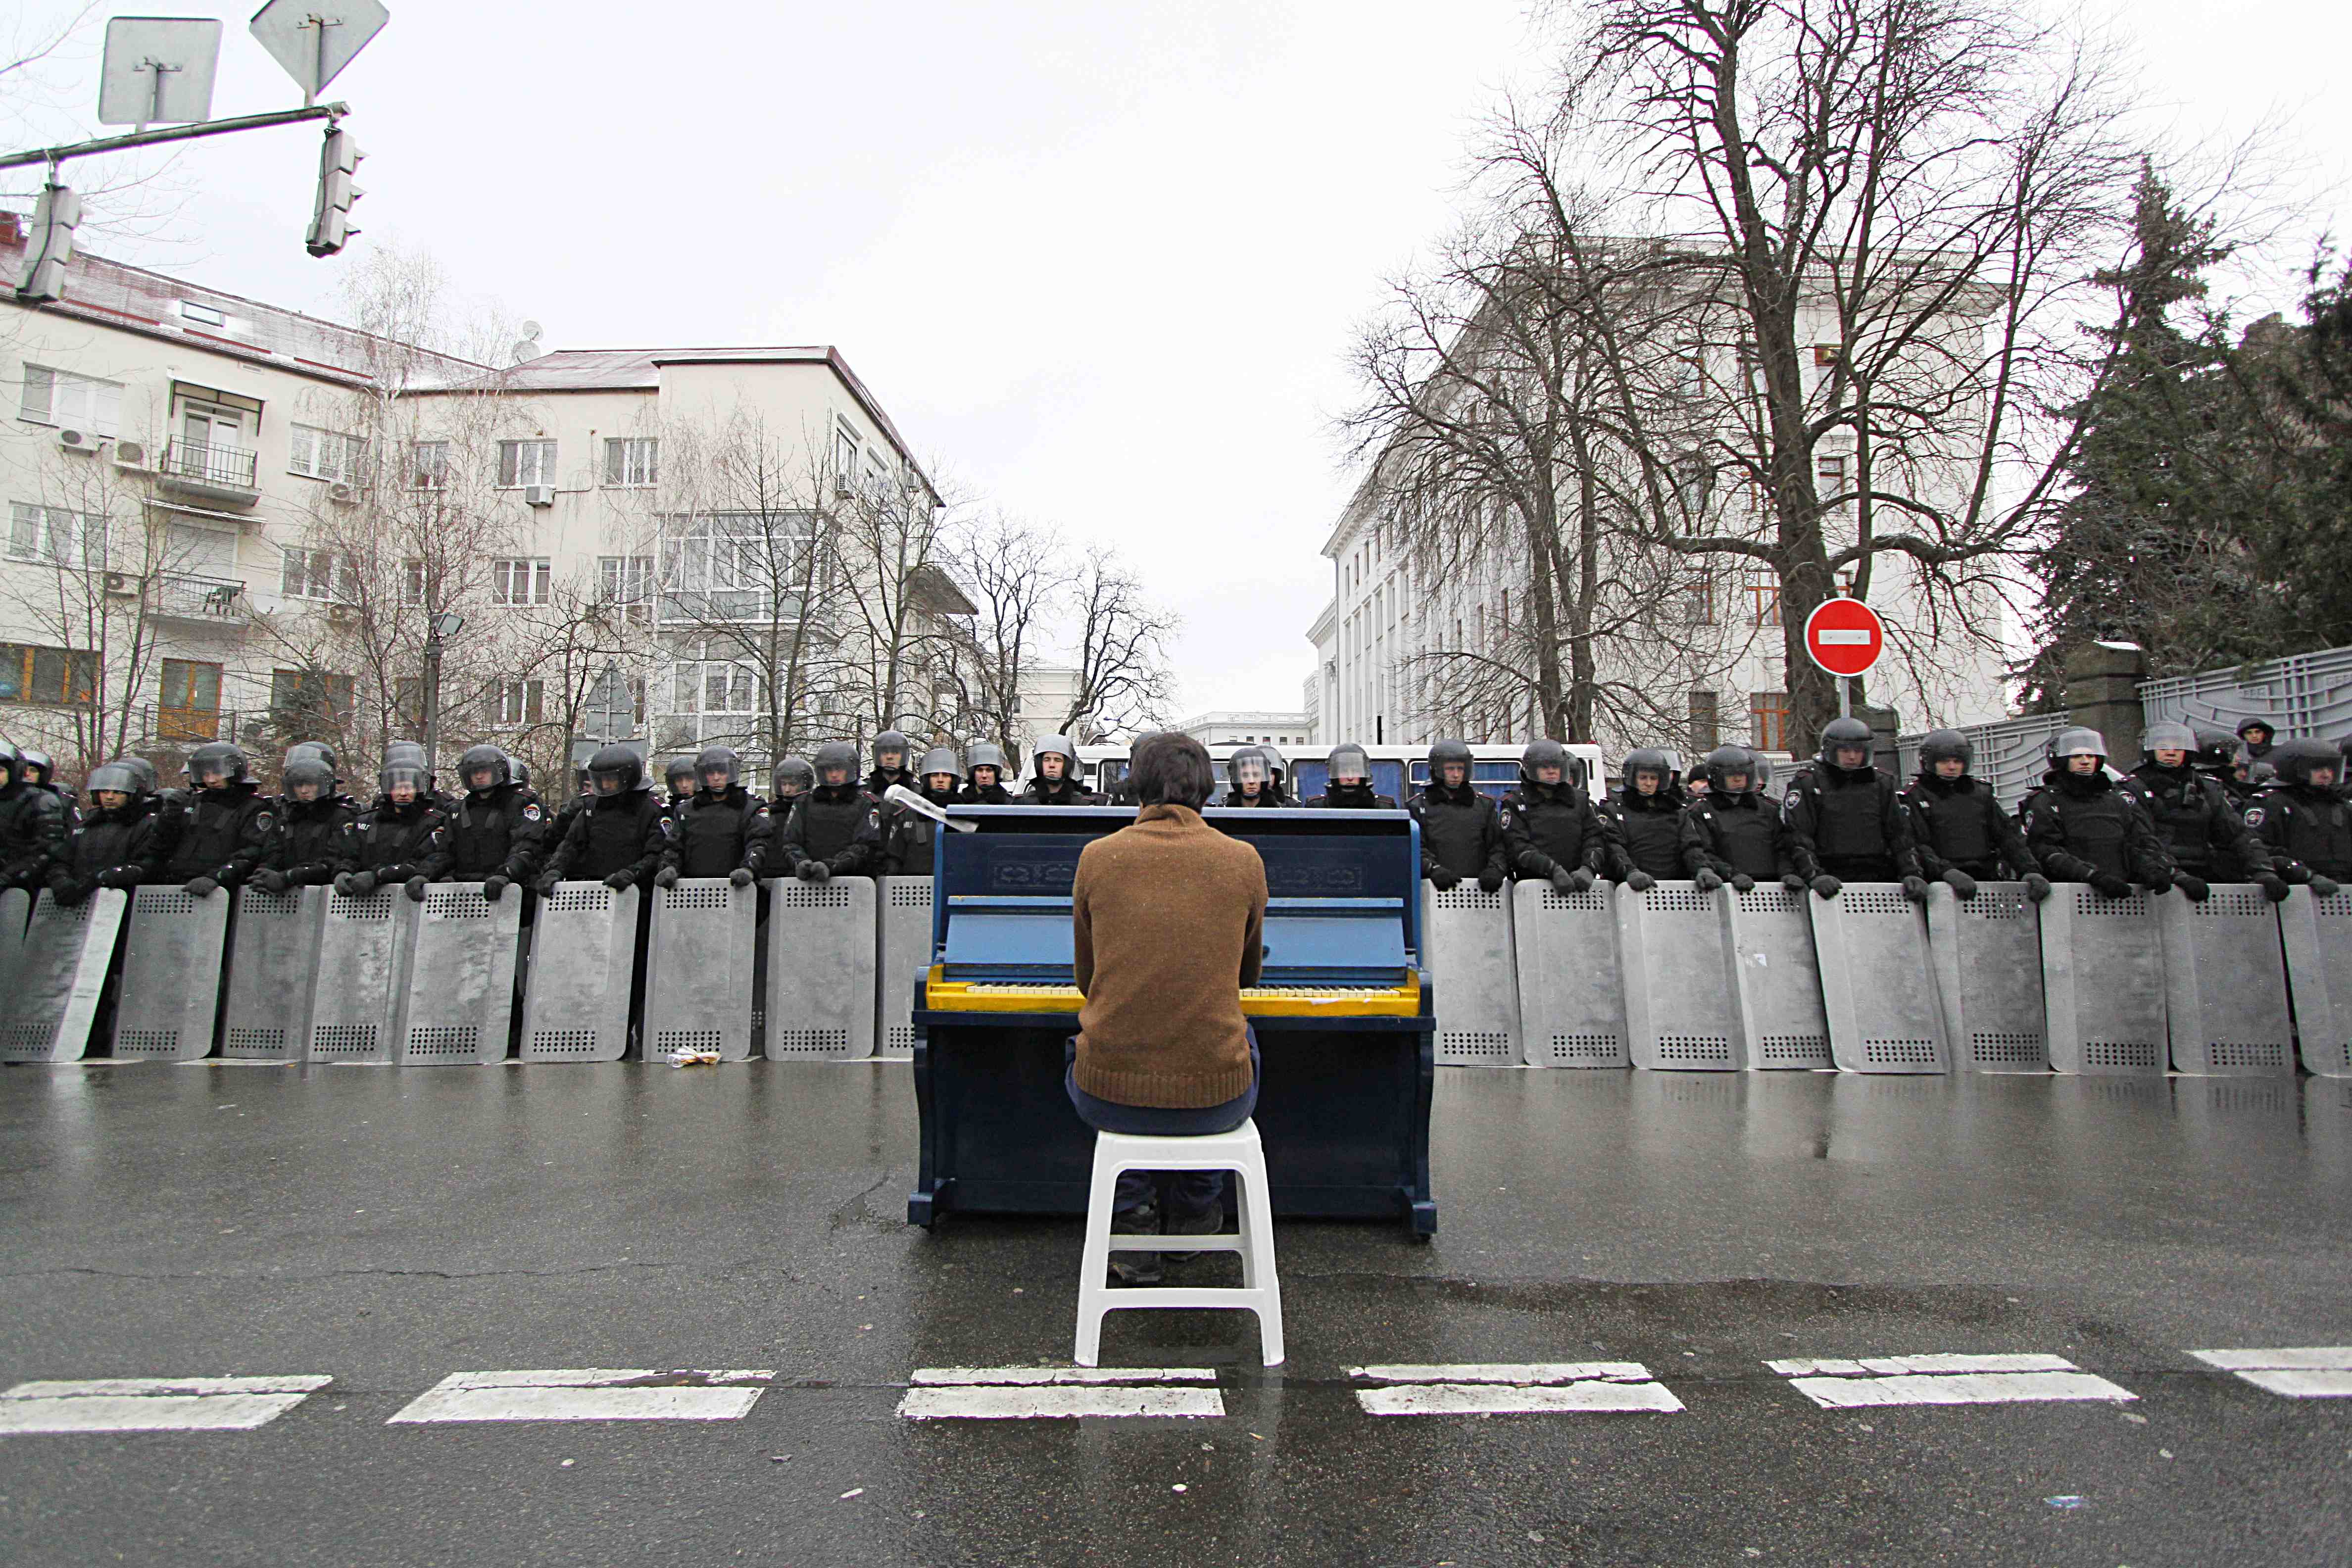 Piano player in front of police force 